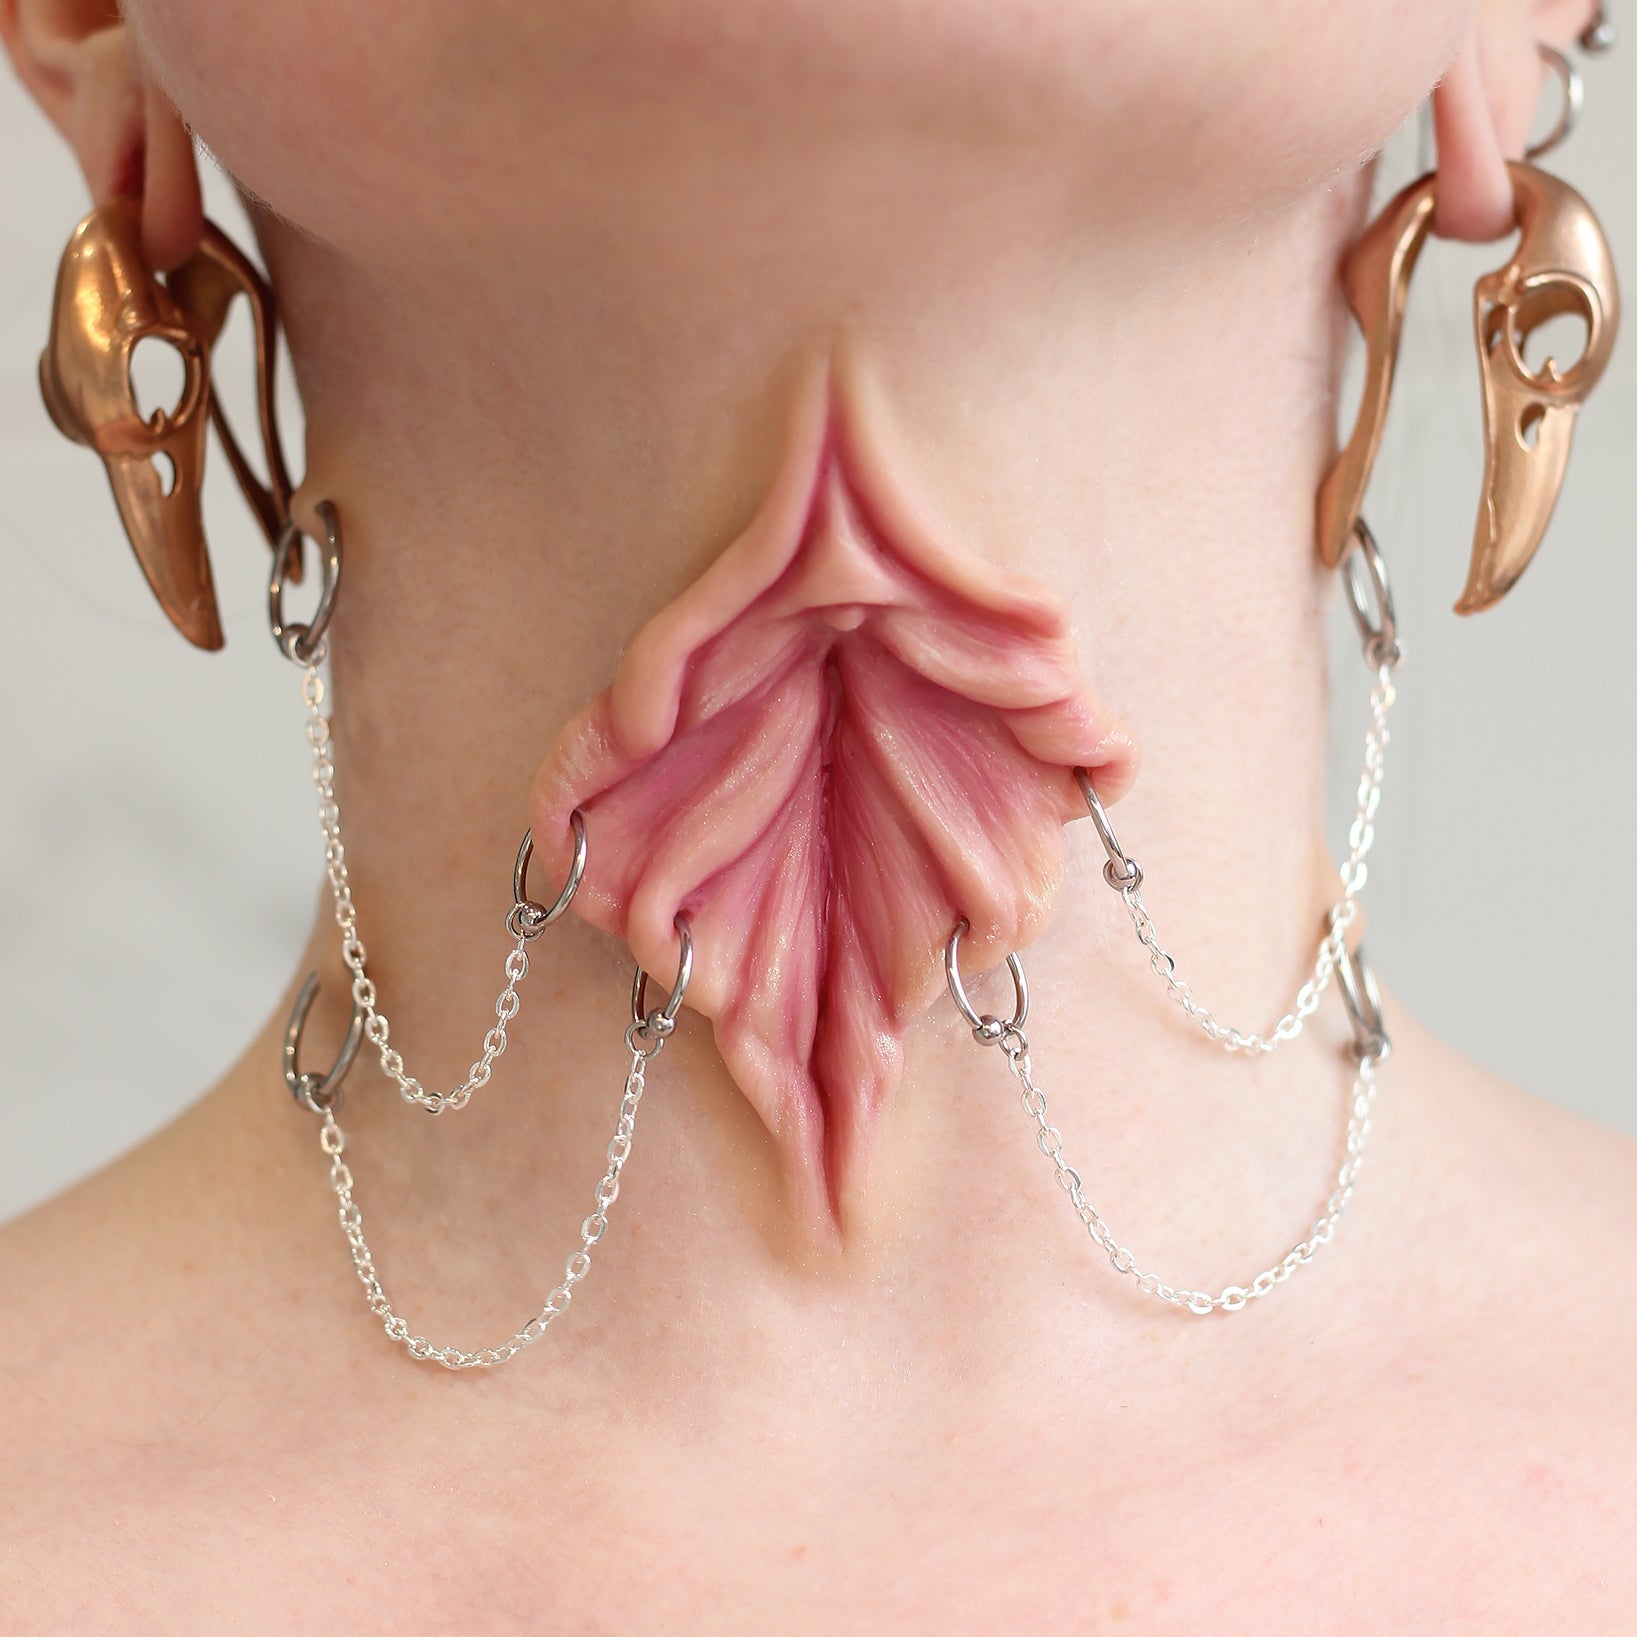 Woman's neck with a flower choker prosthetic